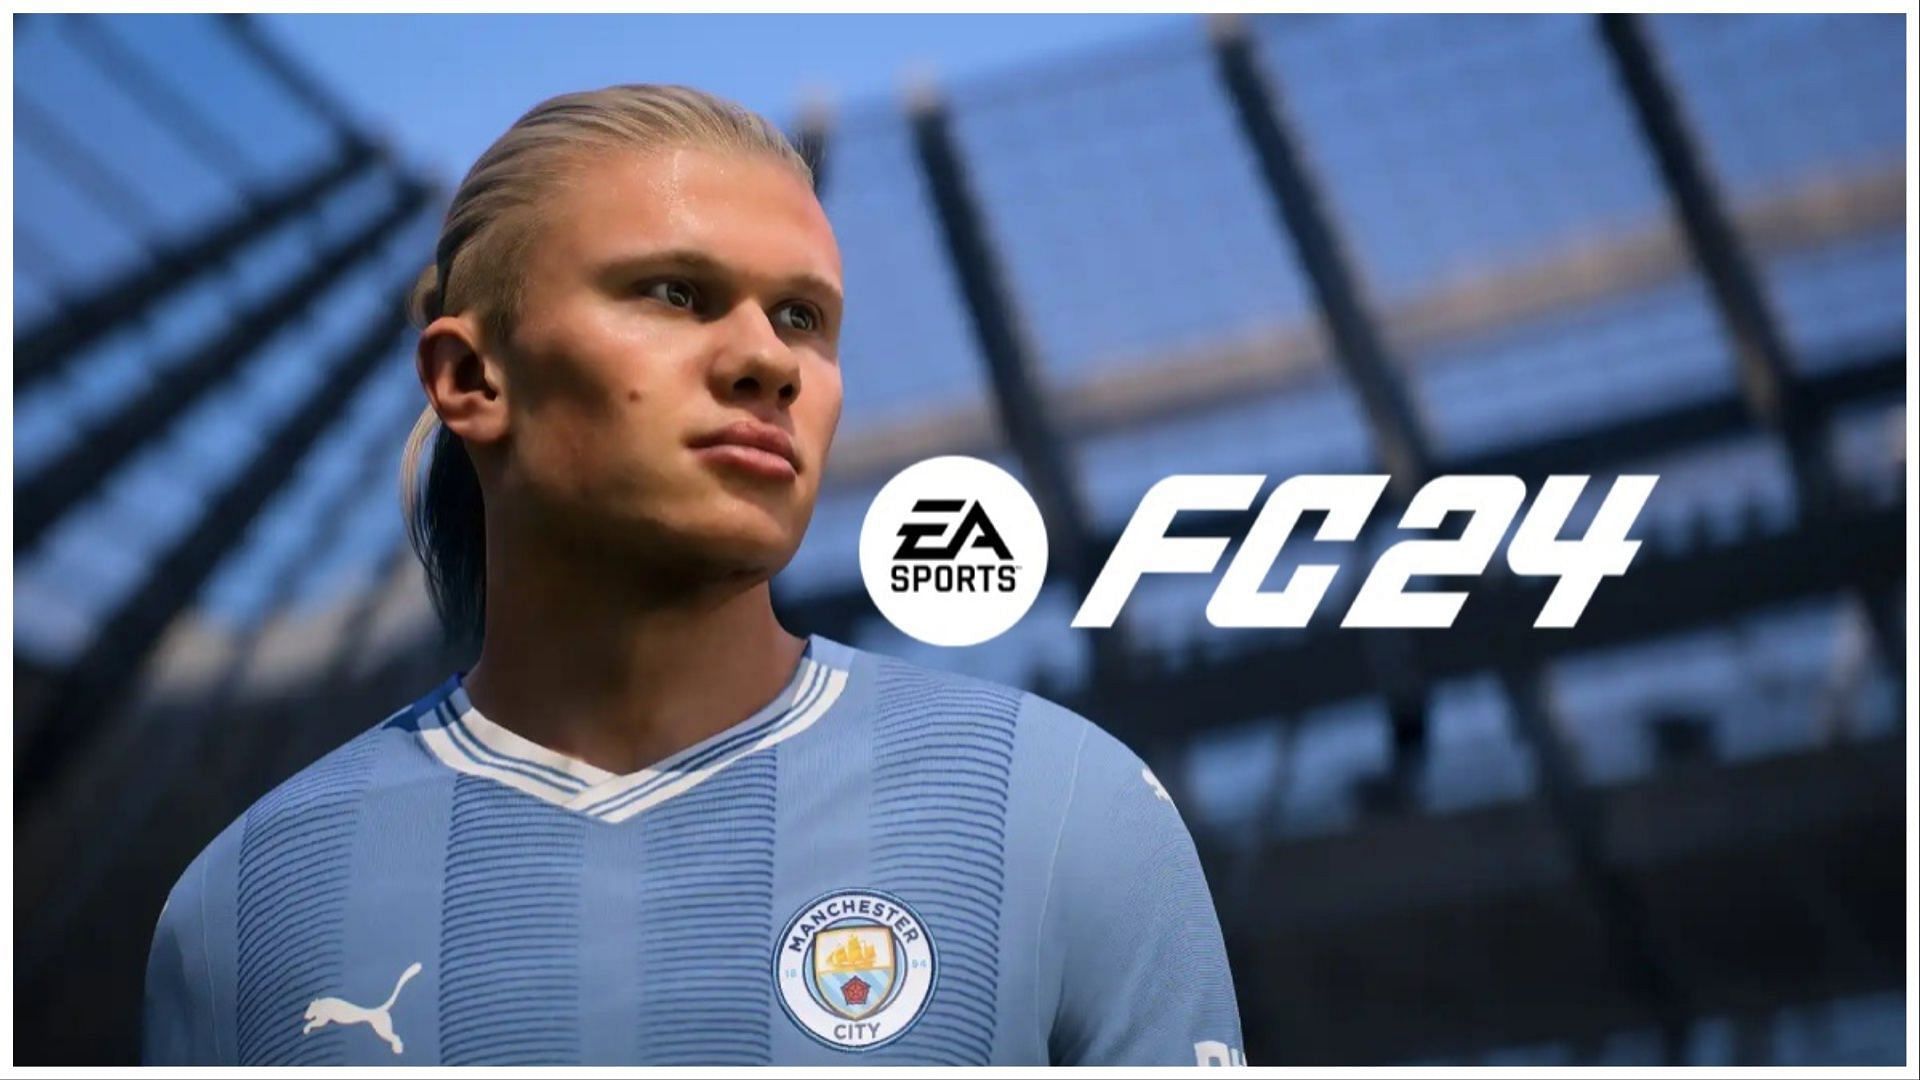 Servers will be taken down in EA FC 24 (Images via EA Sports)